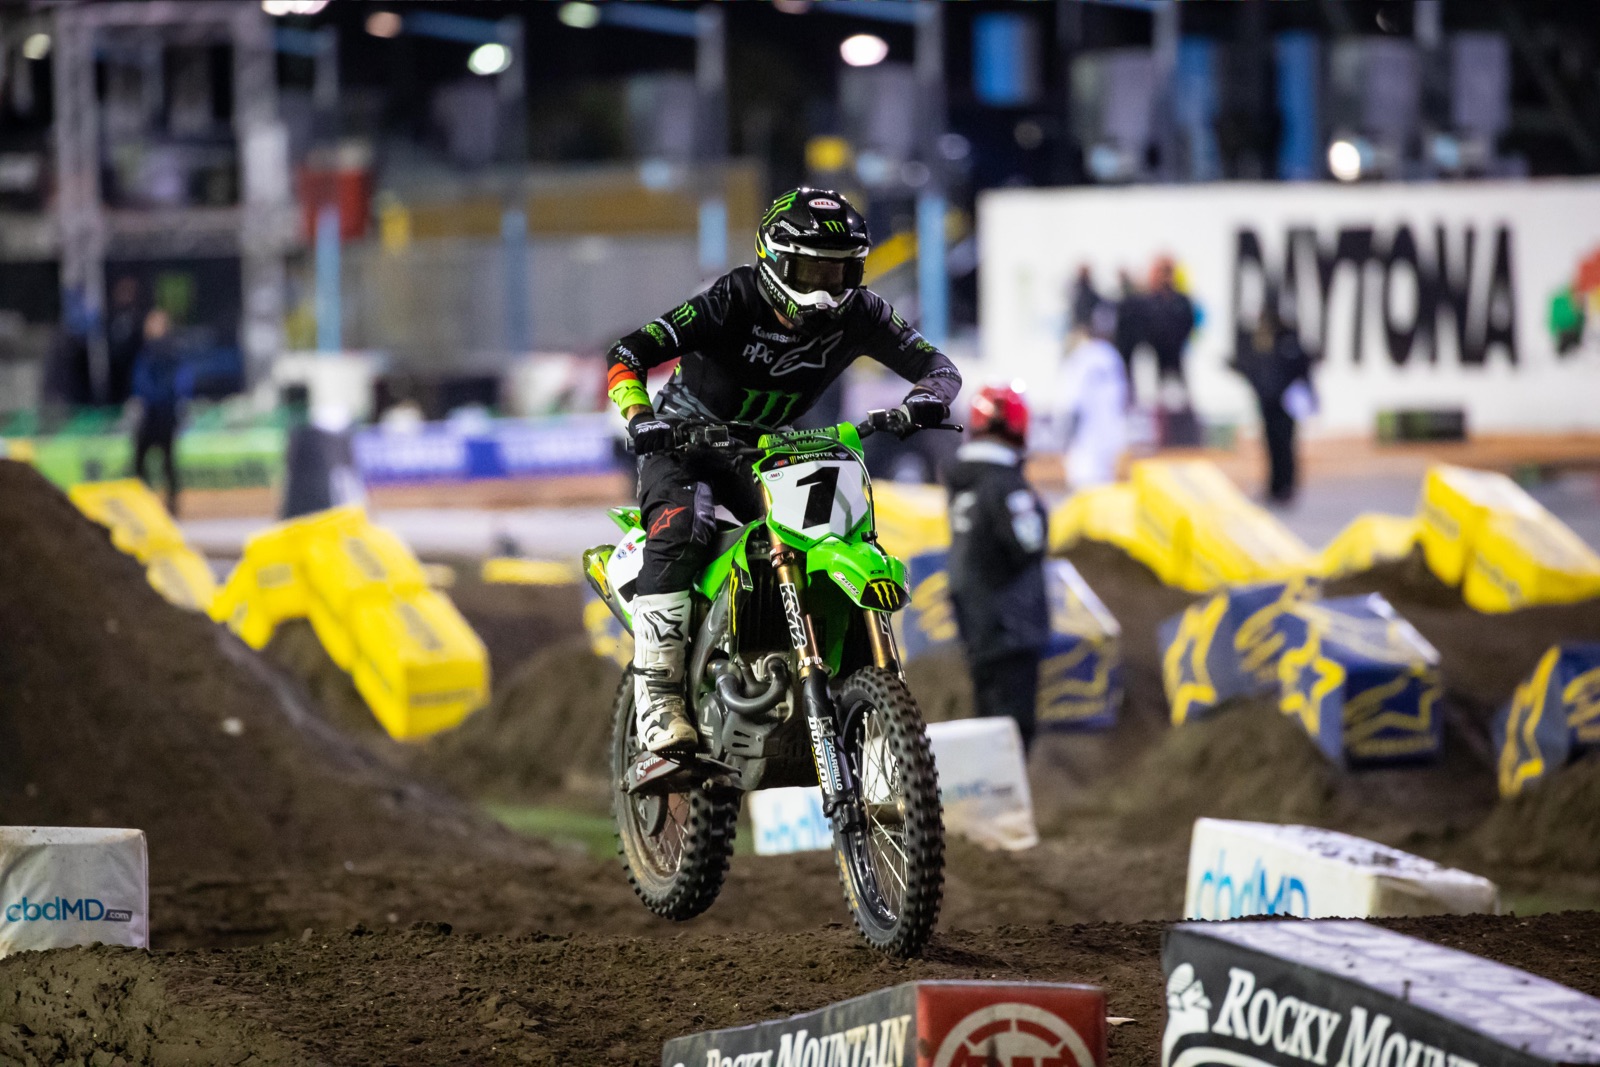 Eli Tomac delivered when he most needed a win